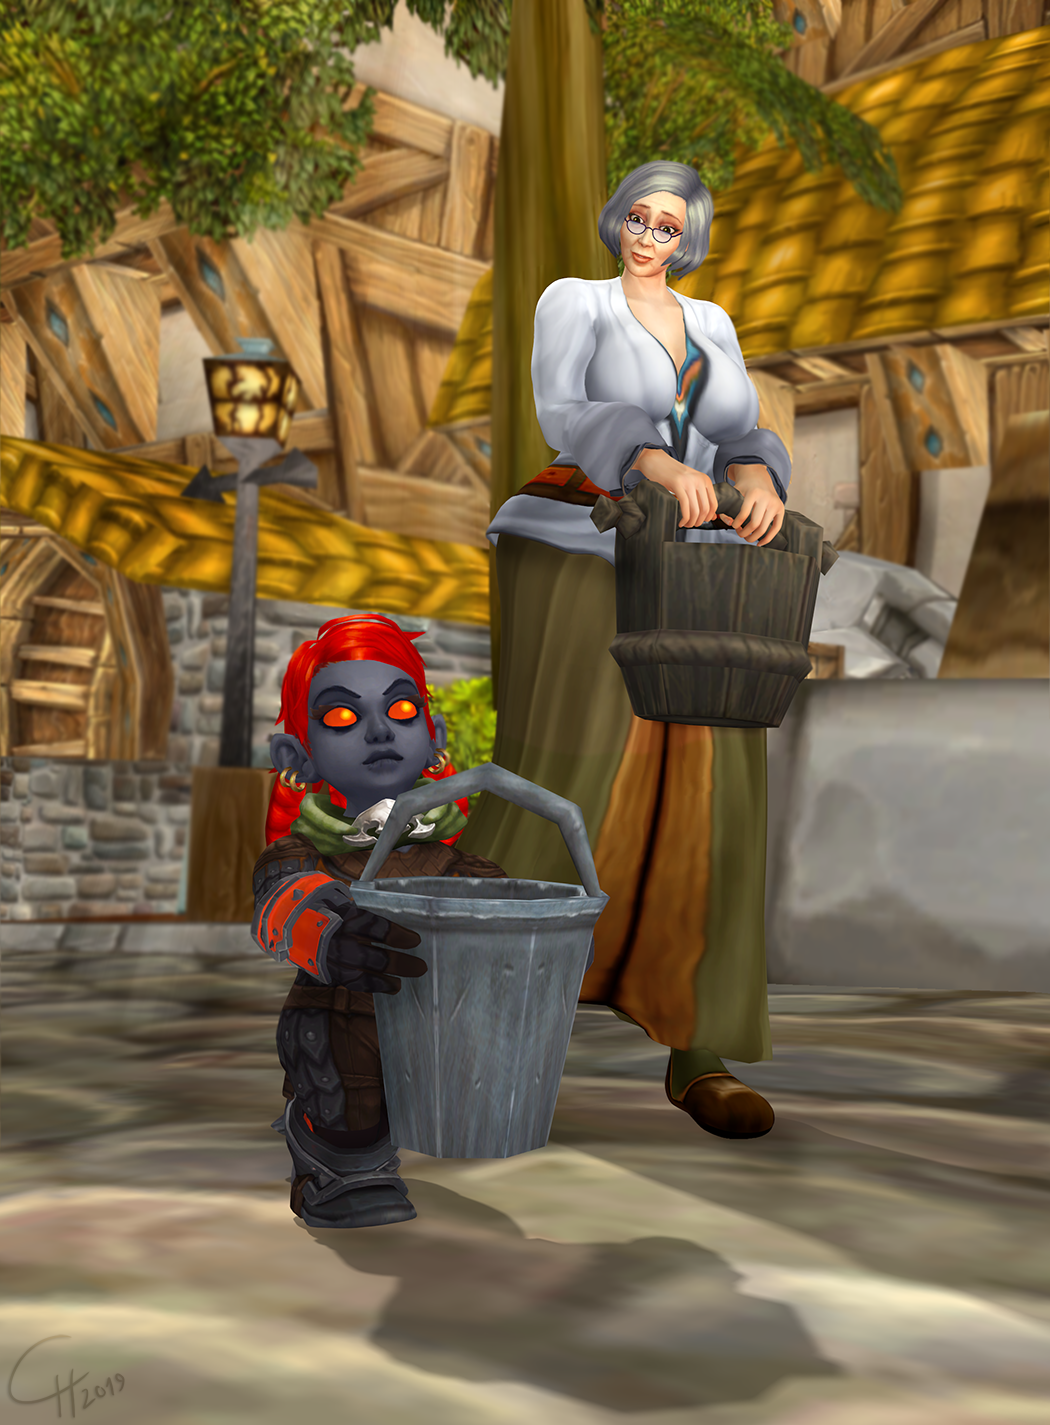 Small Things Helps the World [Gnome/Human/NPC]
While her madam is reporting her knightly
deeds at the barracks, her tough as nails
squire happened to stumble across ol'Emma
and to pass the time help her with her never
ending fetch-quest to refill underground bath house.
[b][url=http://bakaras.com/murlocish/albums/userpics/10001/DarkironGnomeUndEmmaXL.png]==XL-Size Edit==?[/url][/b]
Keywords: NPC;SFW;Human;Gnome;OlEmma;Dark Iron Gnome